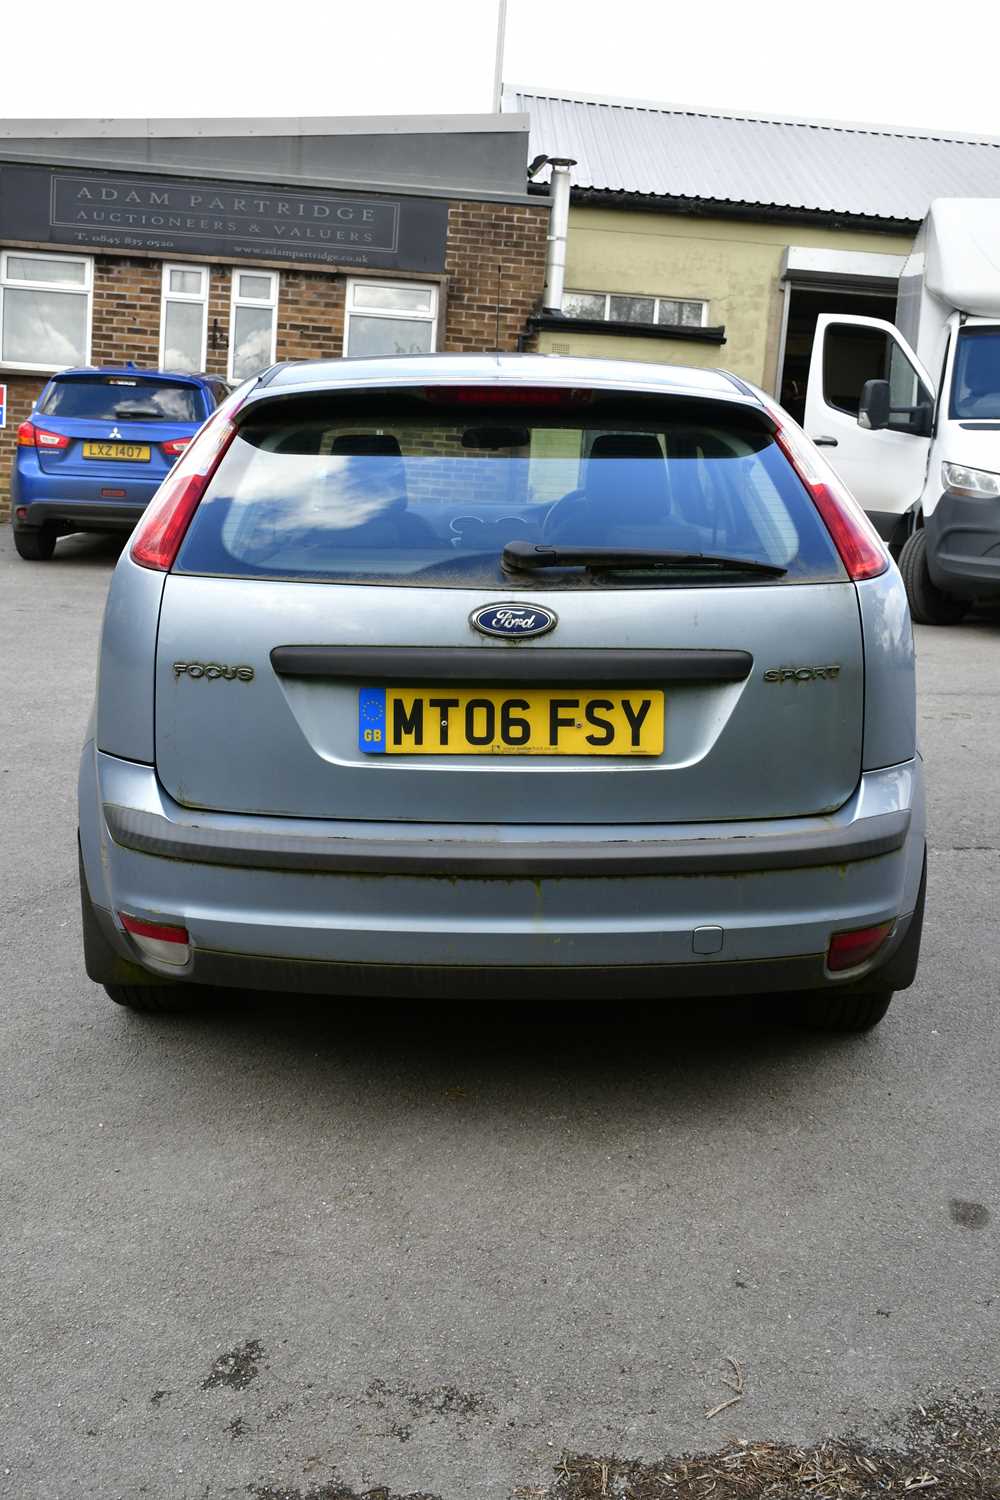 A Ford Focus Sport, registration MT06 FSY, blue colourway, approx mileage 28,271, complete with an - Image 6 of 11